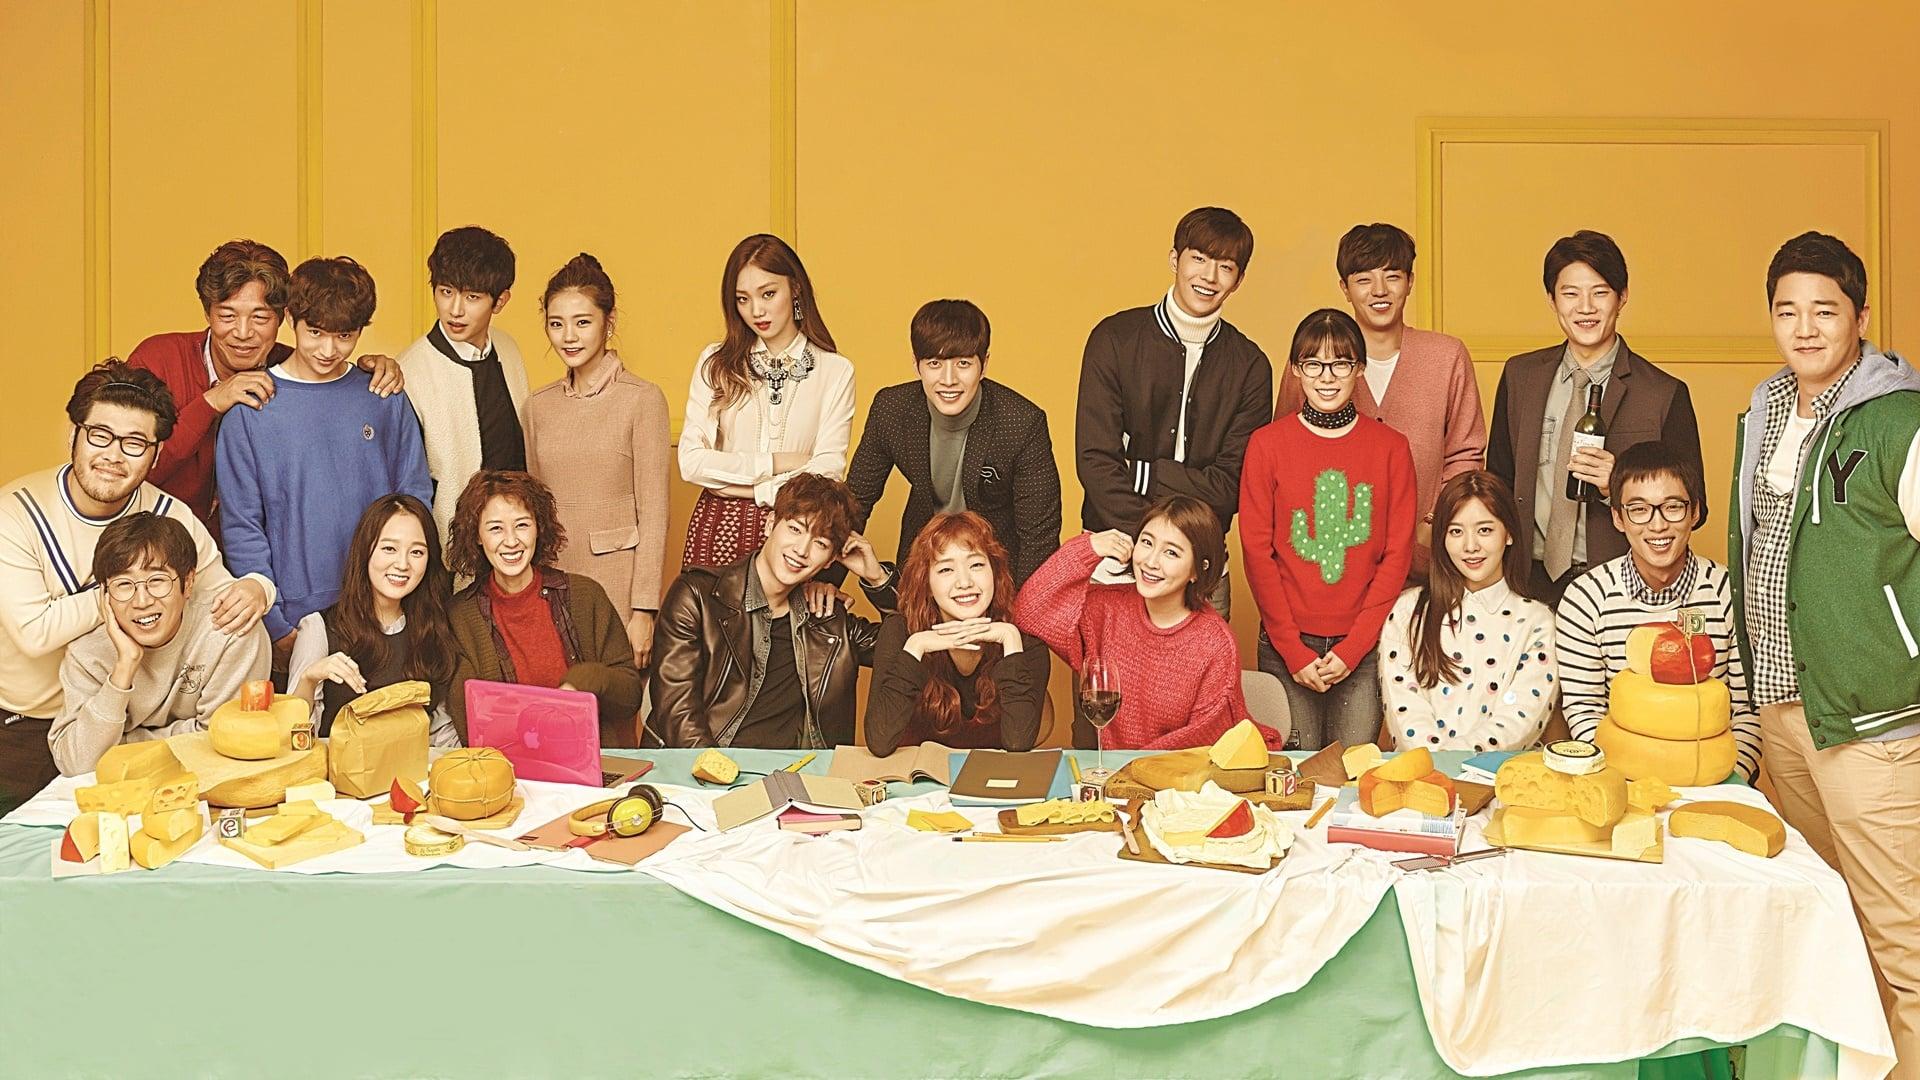 Cheese in the Trap backdrop